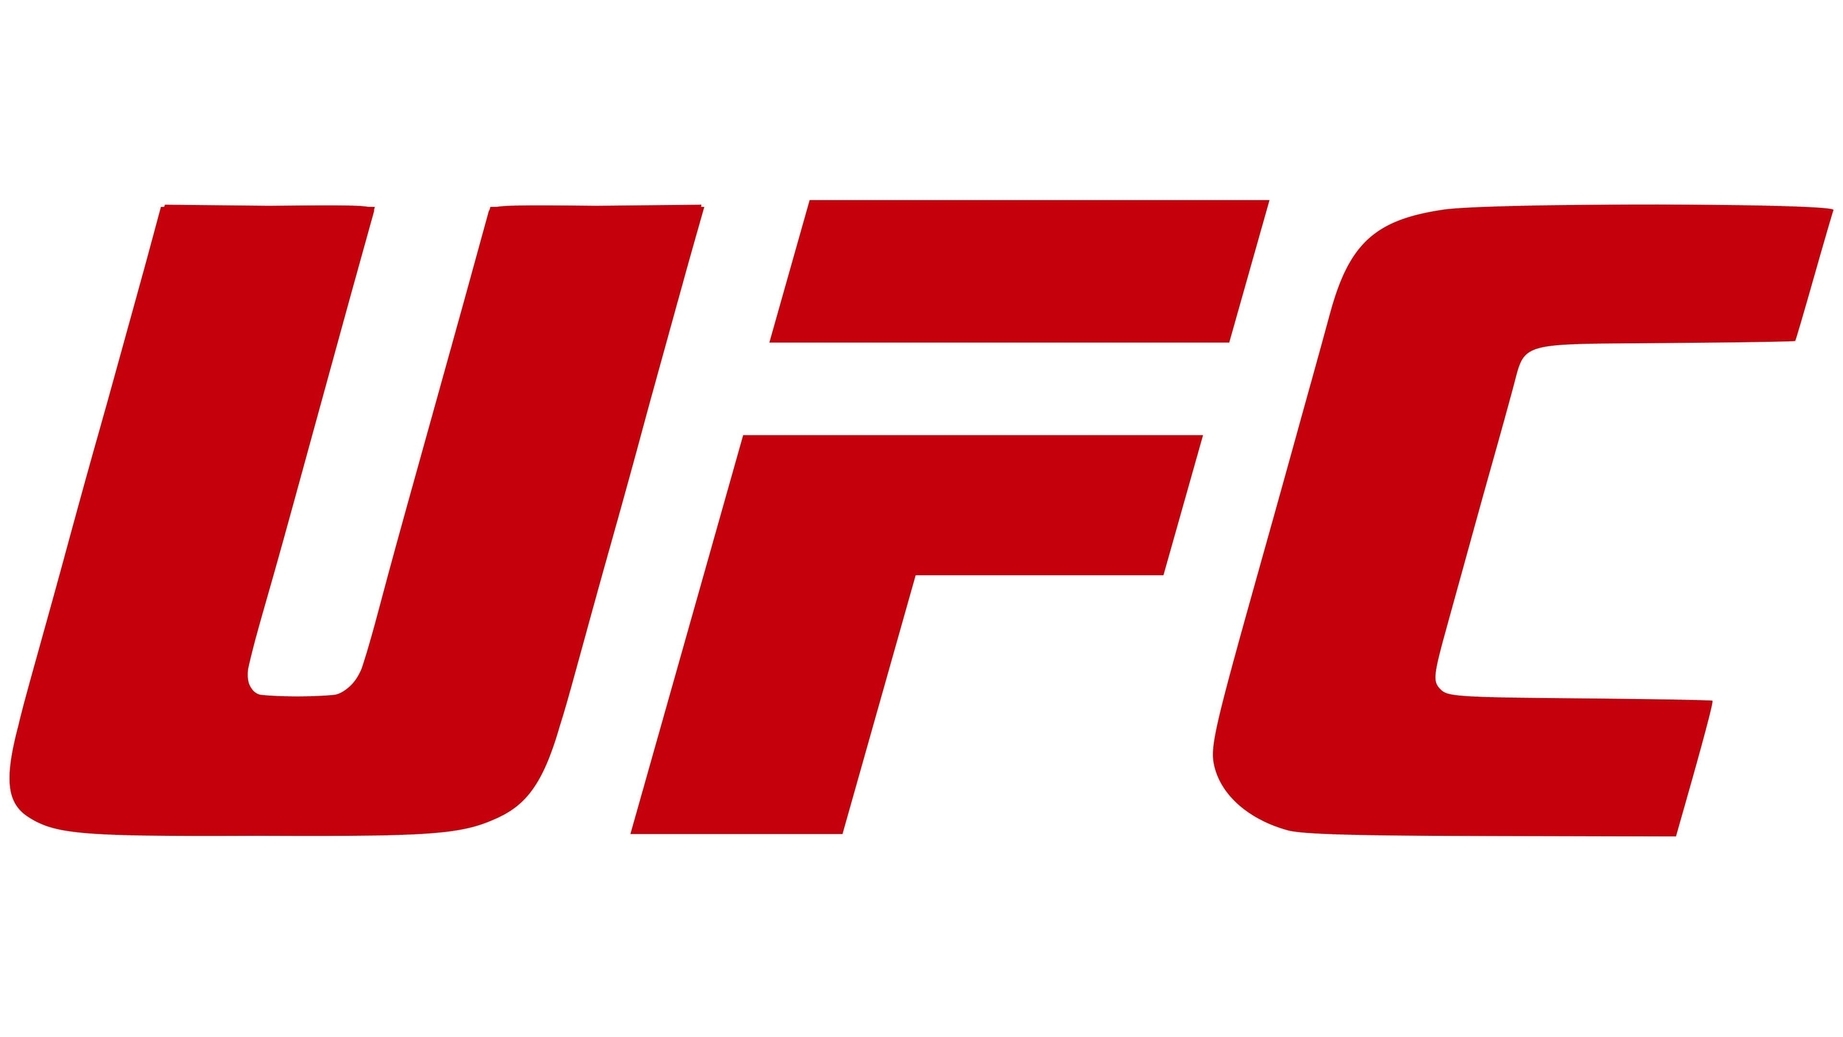 Ultimate fighting championship ufc sign 2015 present